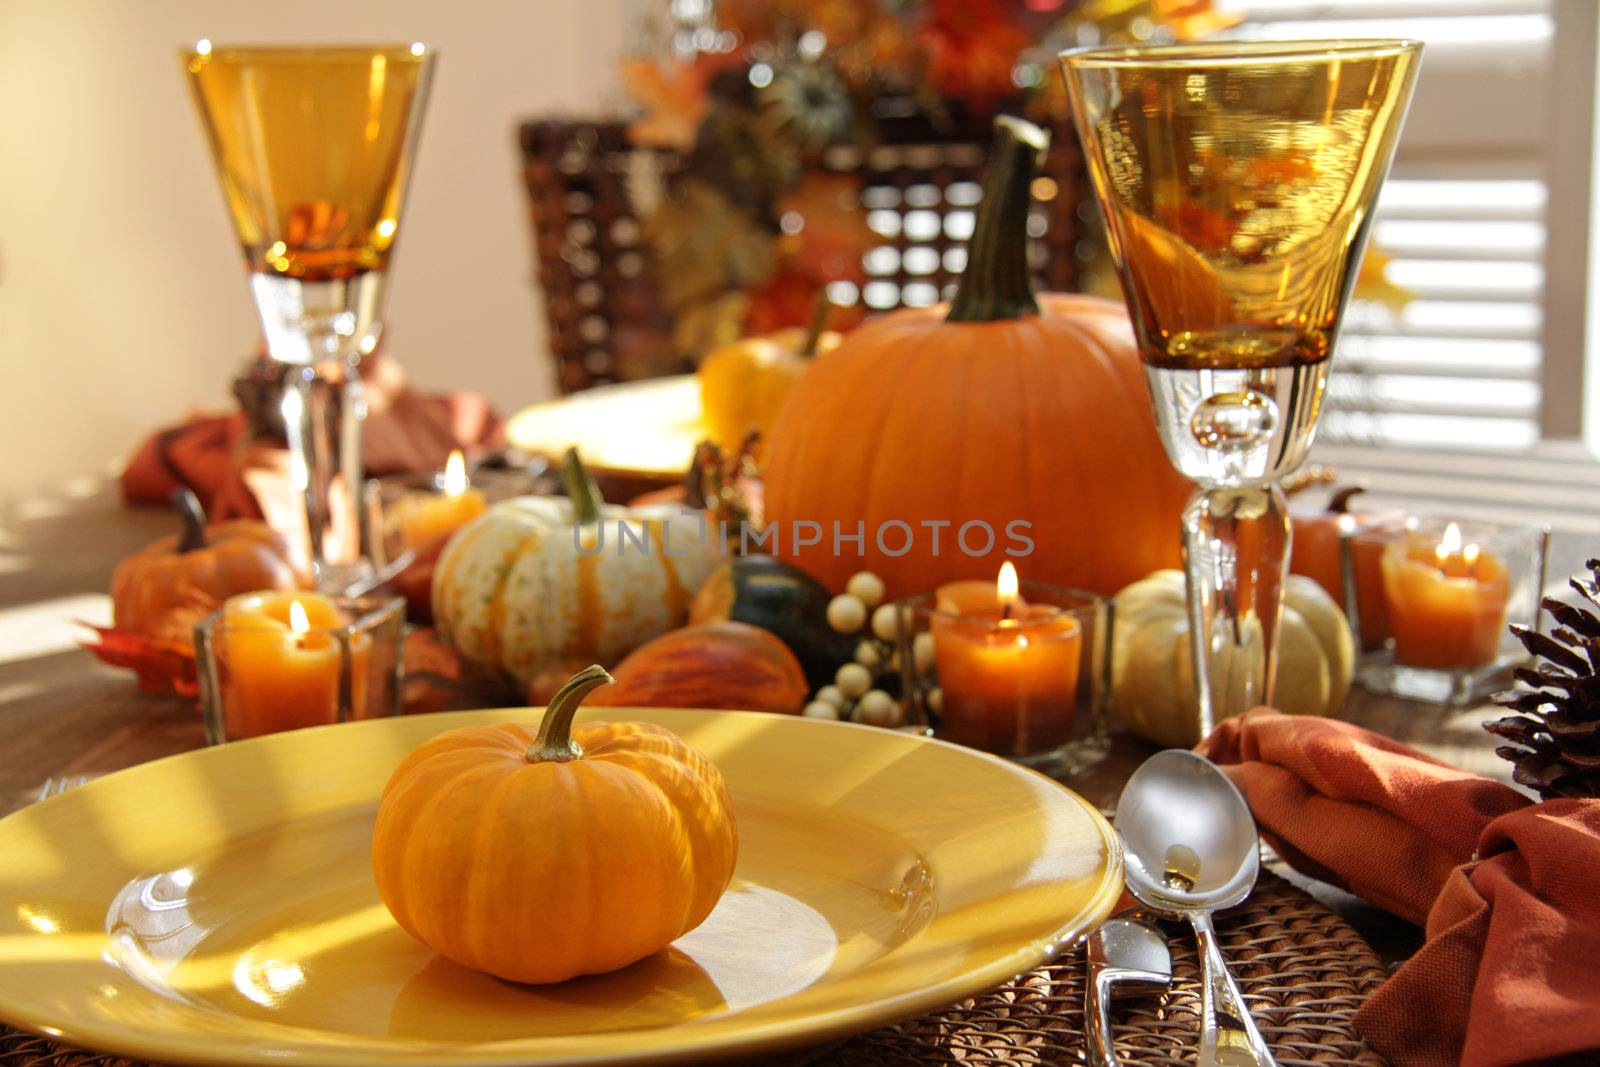 Place settings ready for Thanksgiving by Sandralise